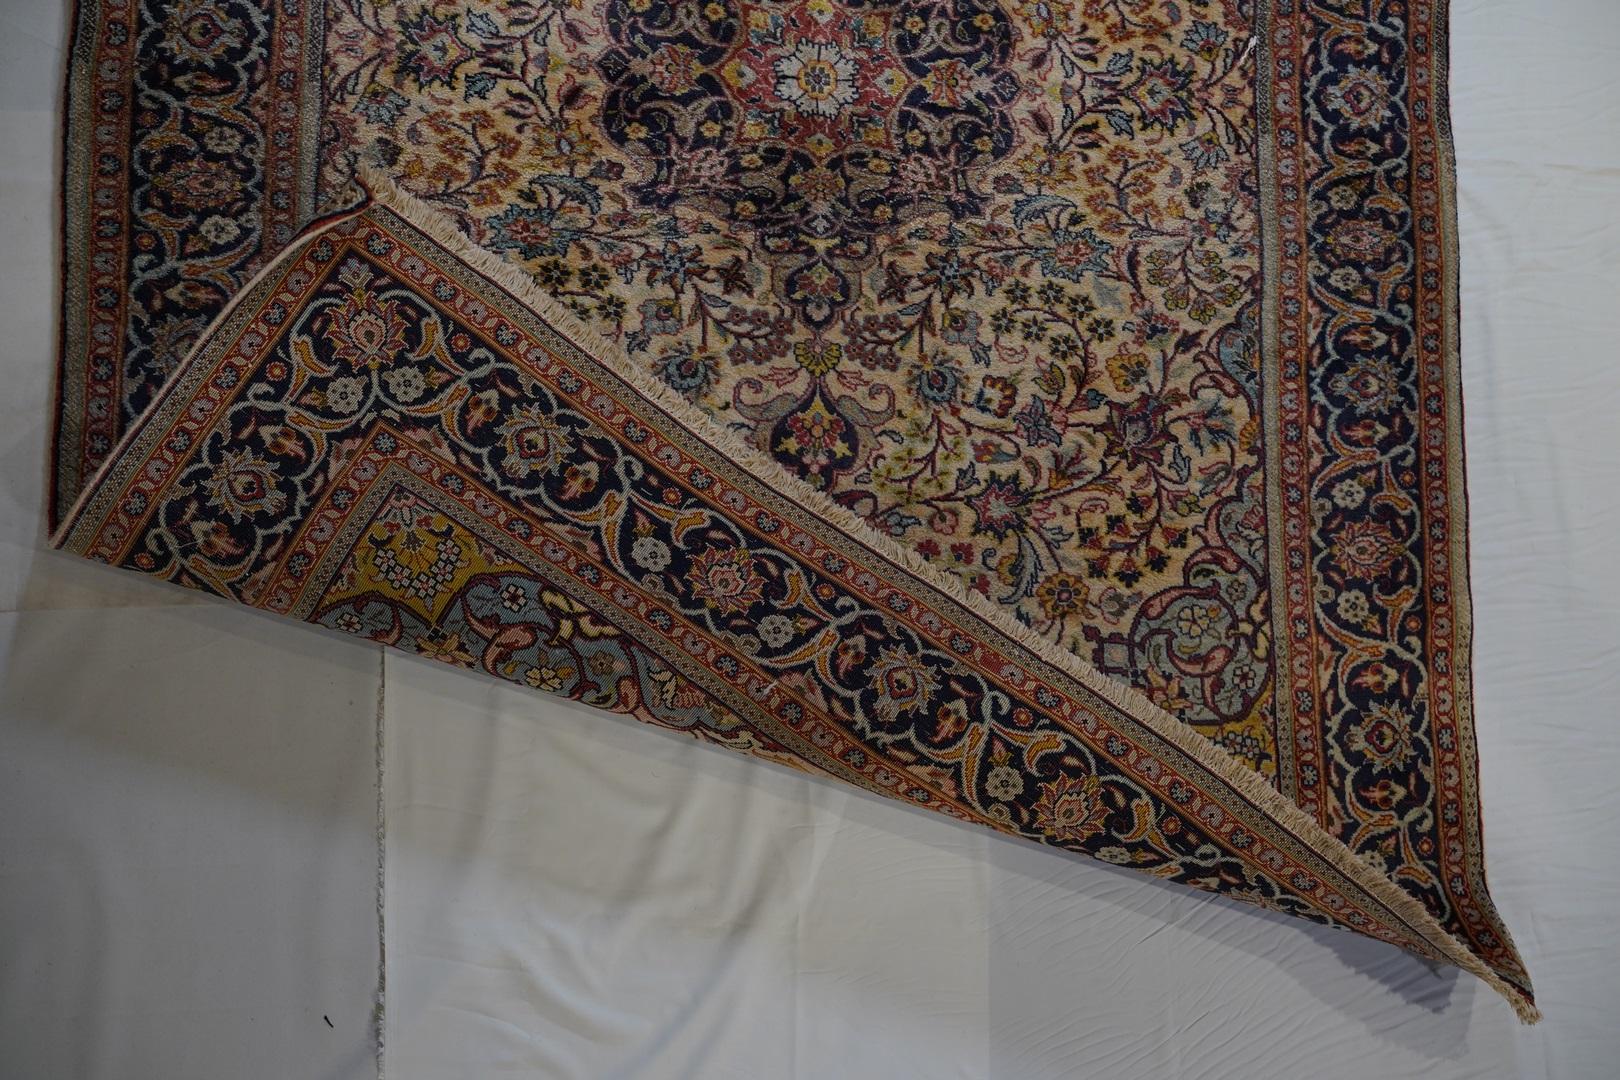 This 1940 Isfahan  balances beautifully executed soft tone colors with intricate design. Have a look at the “rolling“ corner pieces in light blue backed by deep yellows and pinks. This is an unusual piece in terms of soft pastels and a high degree